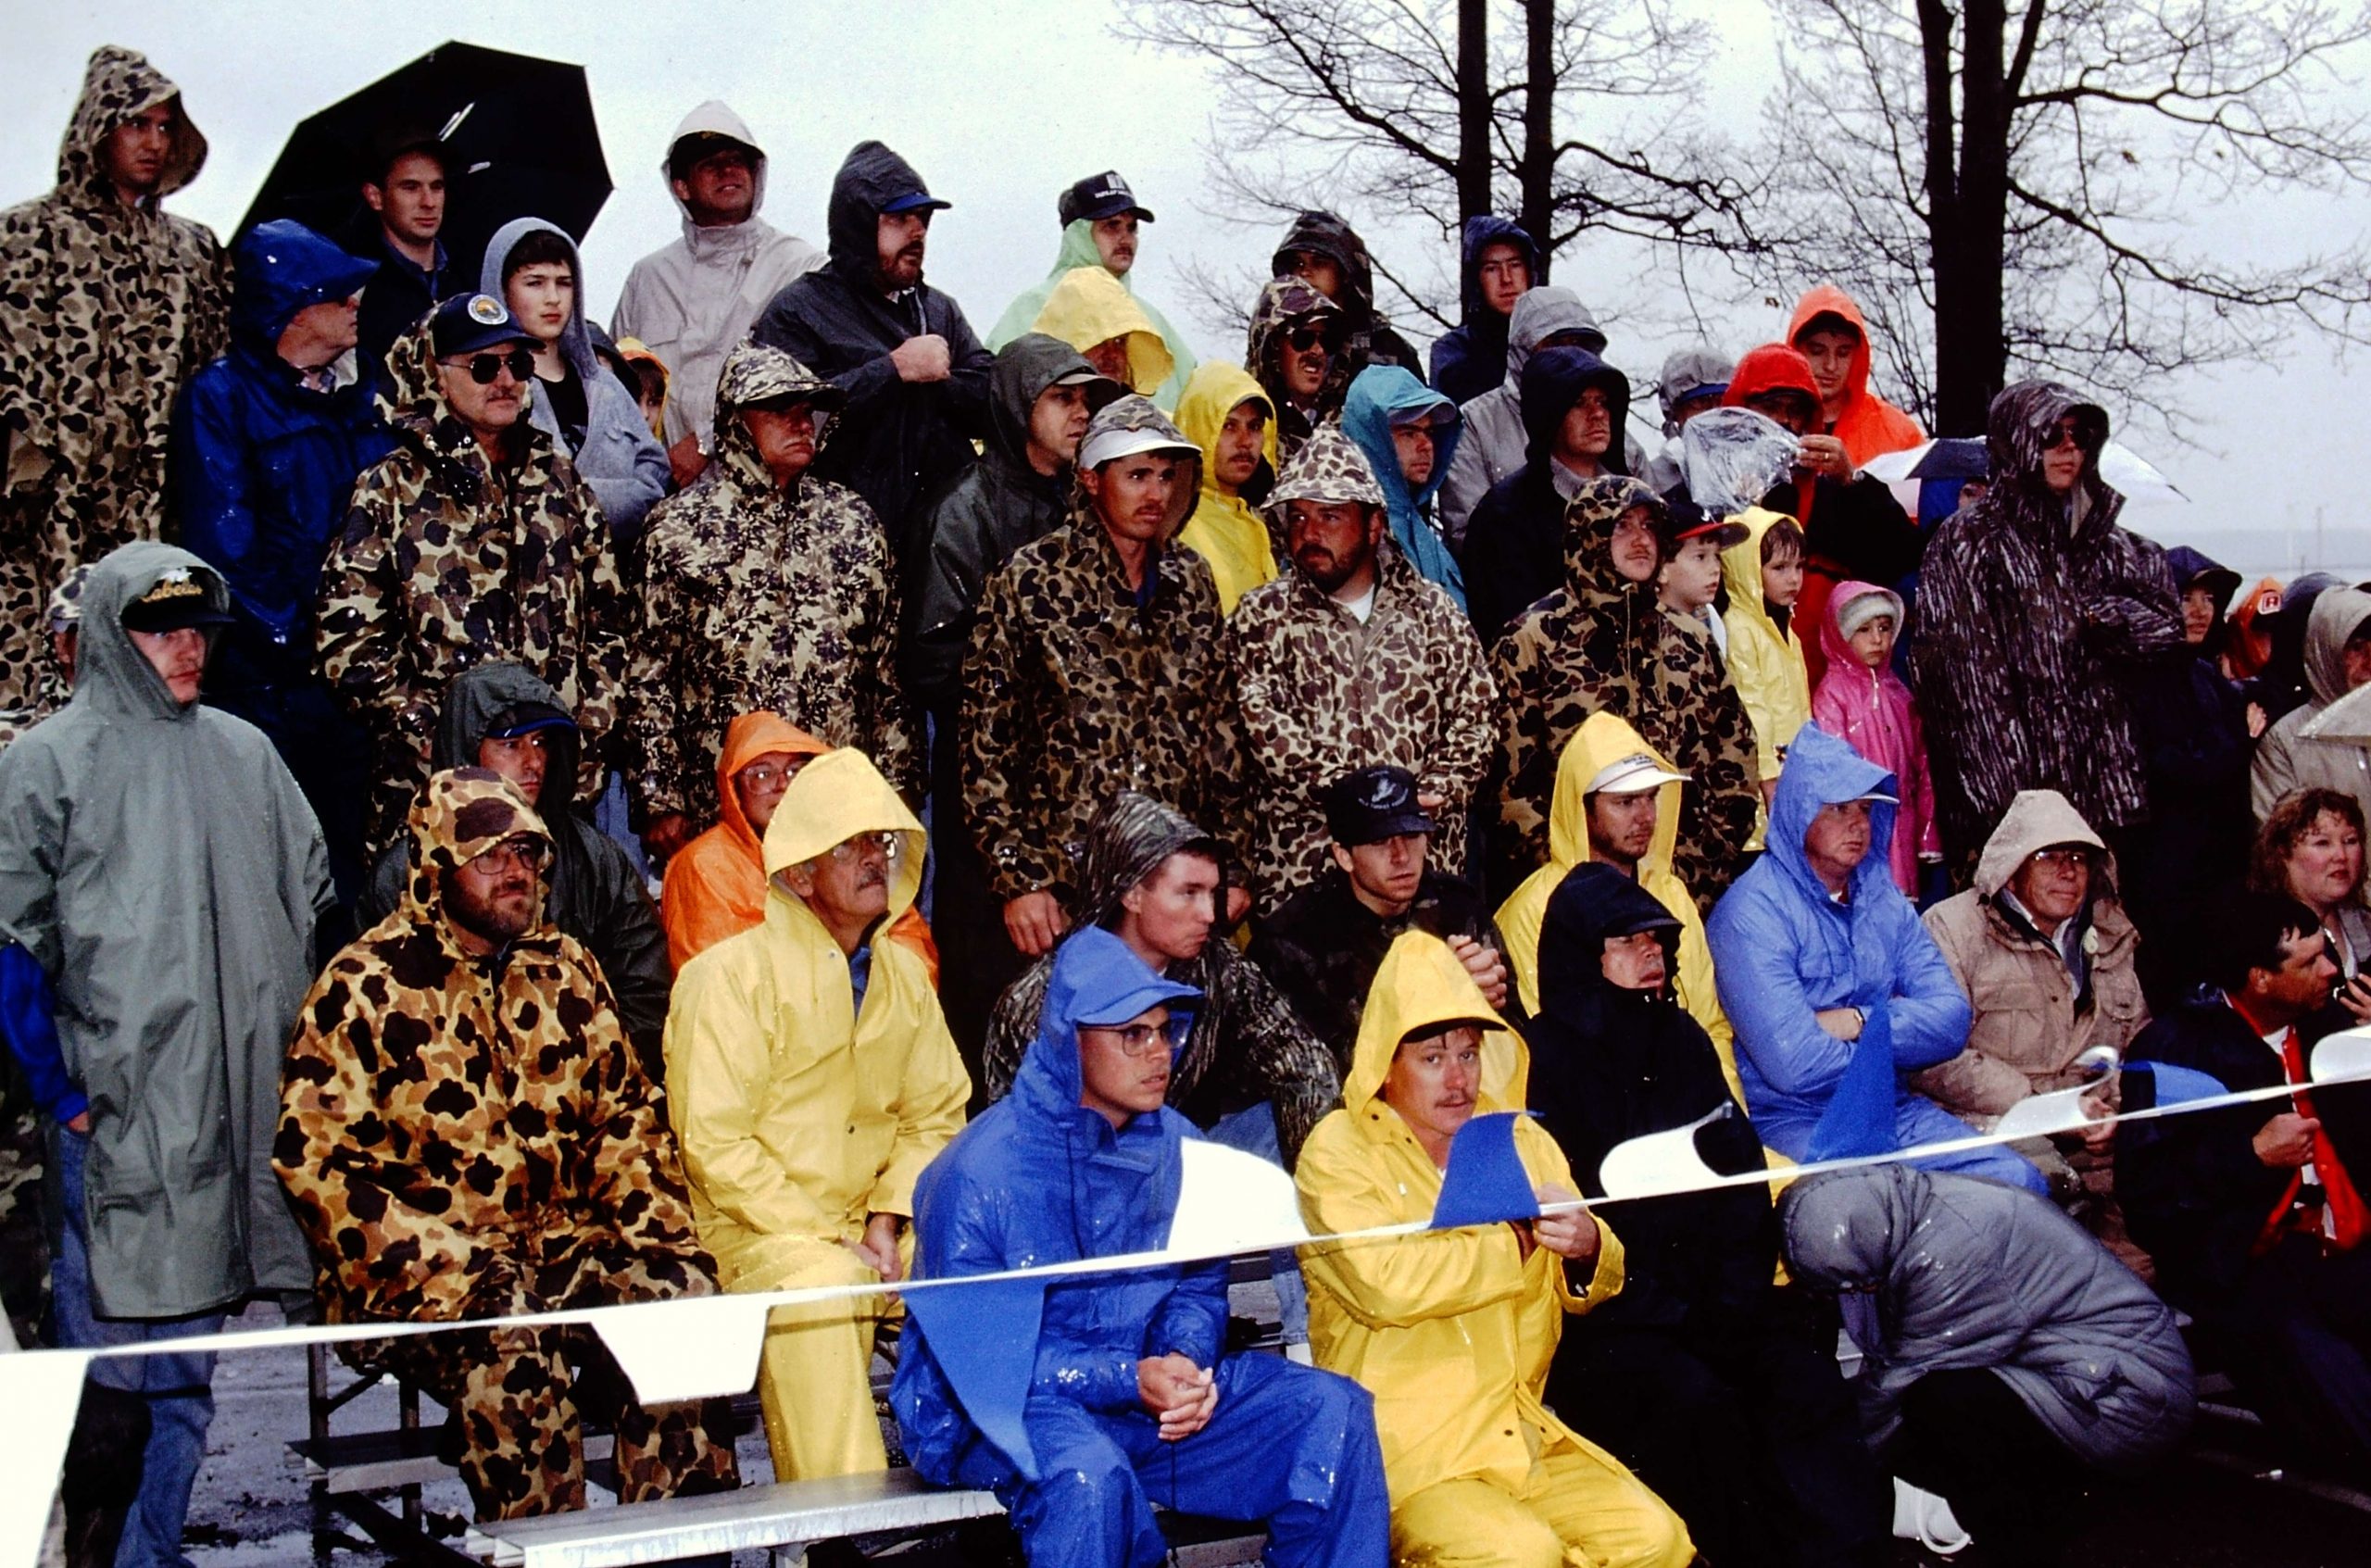 Soaked but dedicated fishing fans.